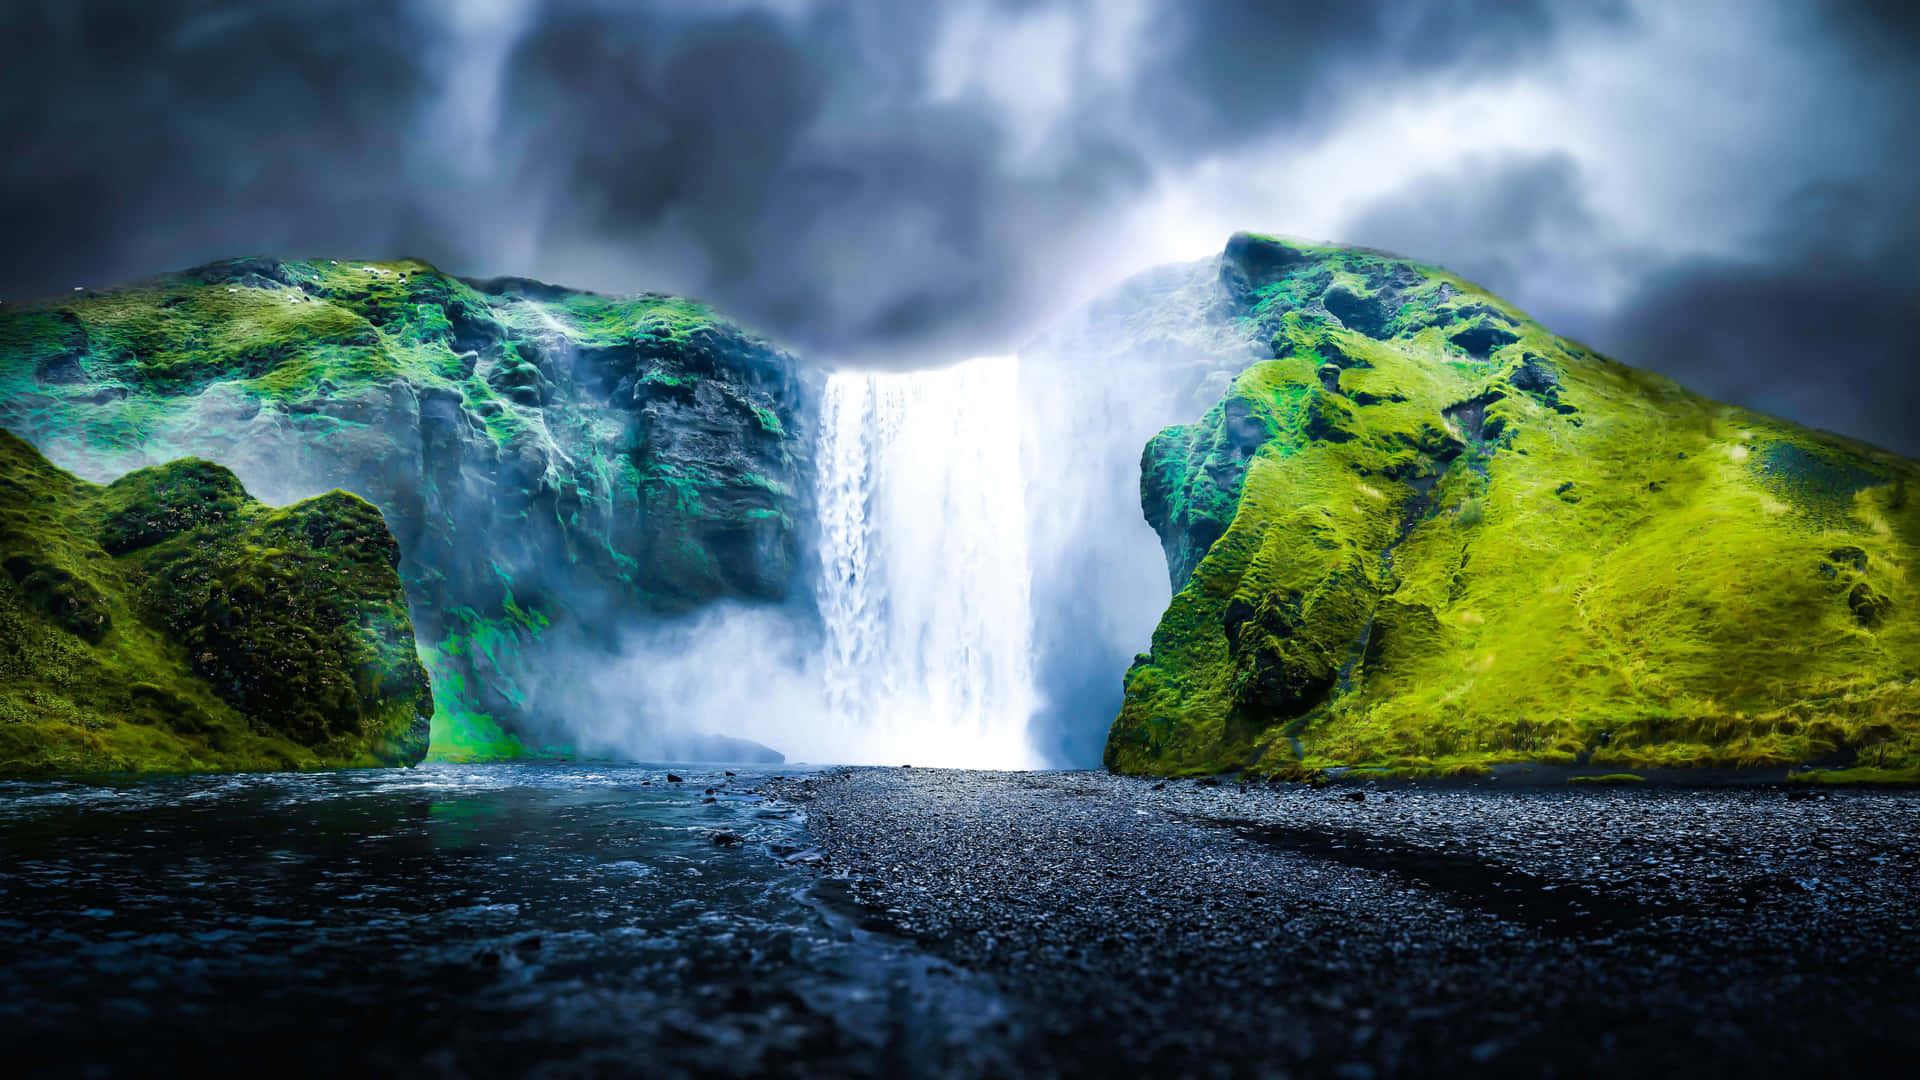 Captivating 4k Image Of A Majestic Waterfall Wallpaper